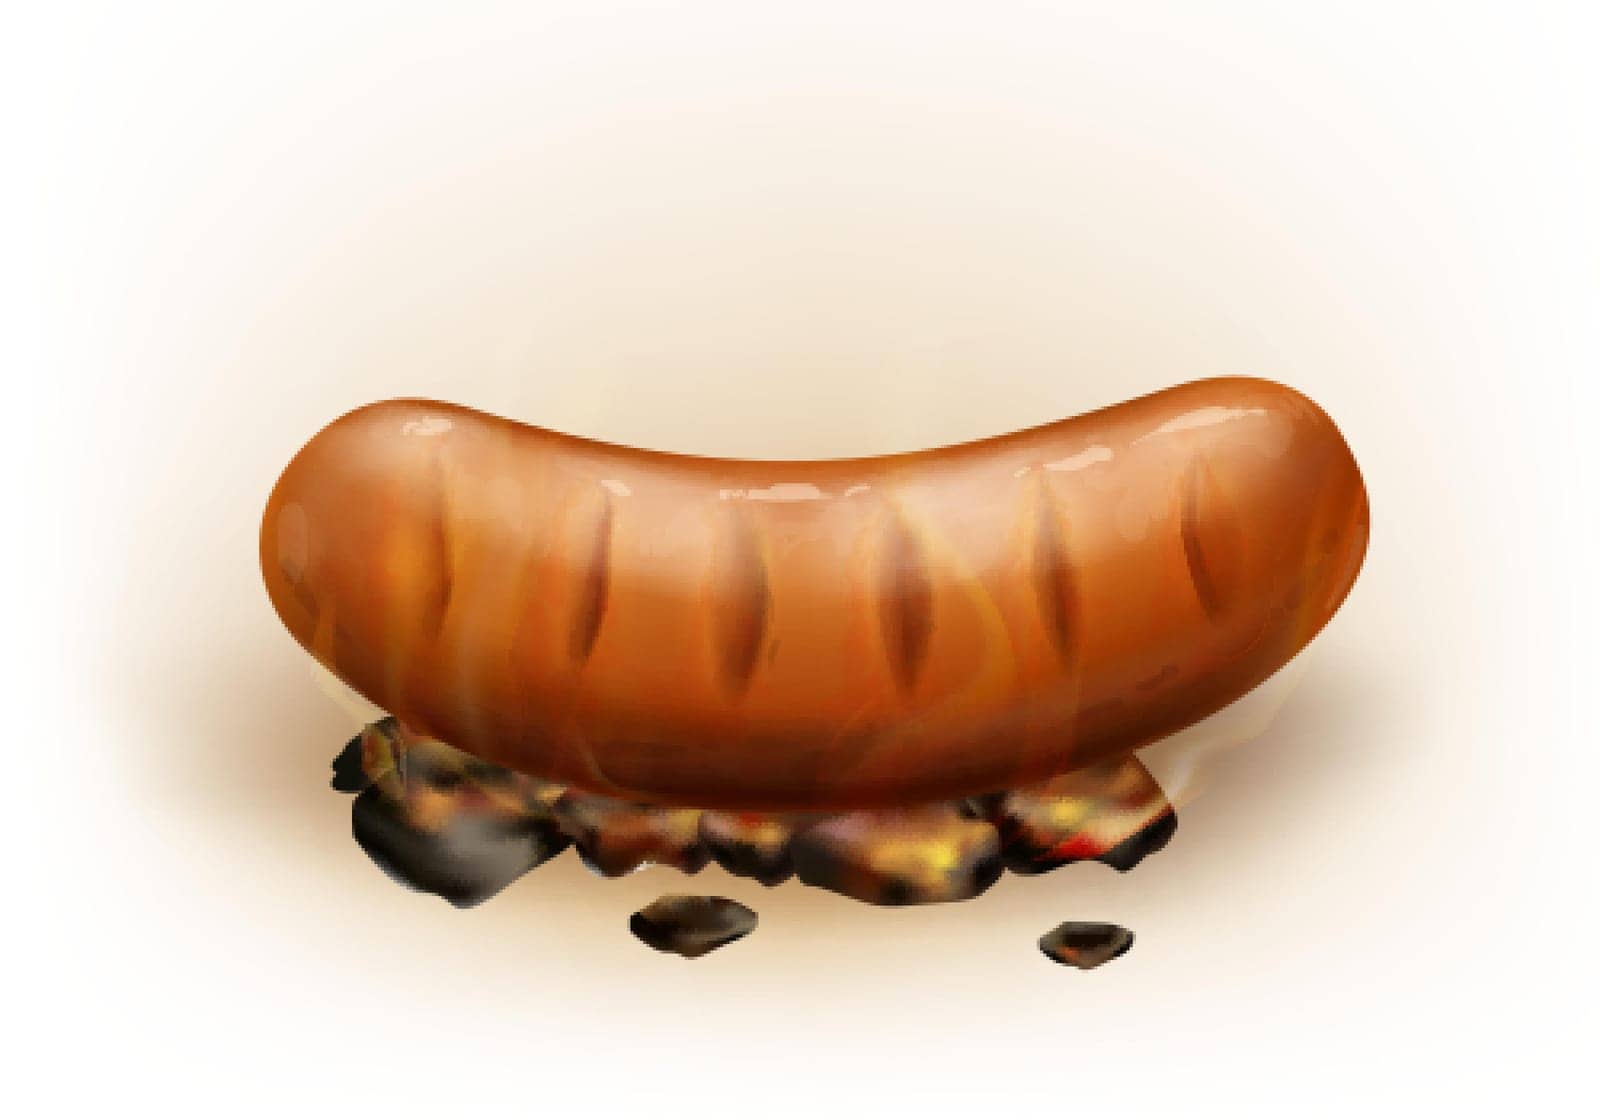 Vector realistic hot juicy grilled sausage roasted on coals, isolated on white background. Pork or beef bratwurst cooked on smoldering charcoal. Picnic barbeque meal, street fast food. Traditional bbq